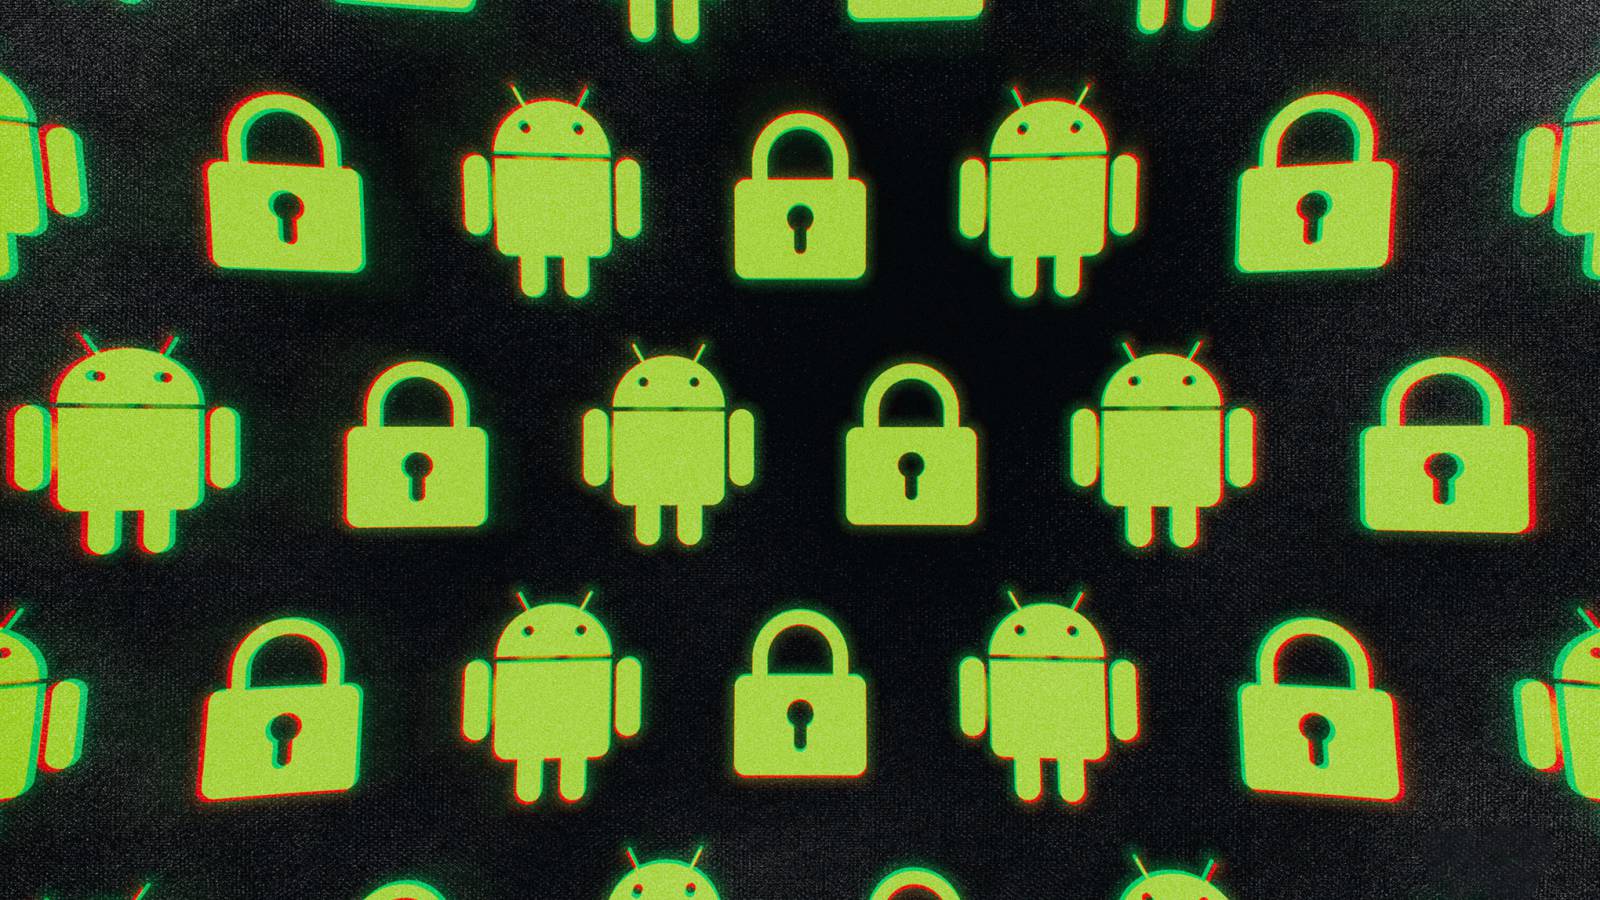 WARNING for Android, New BIG DANGER for Phones